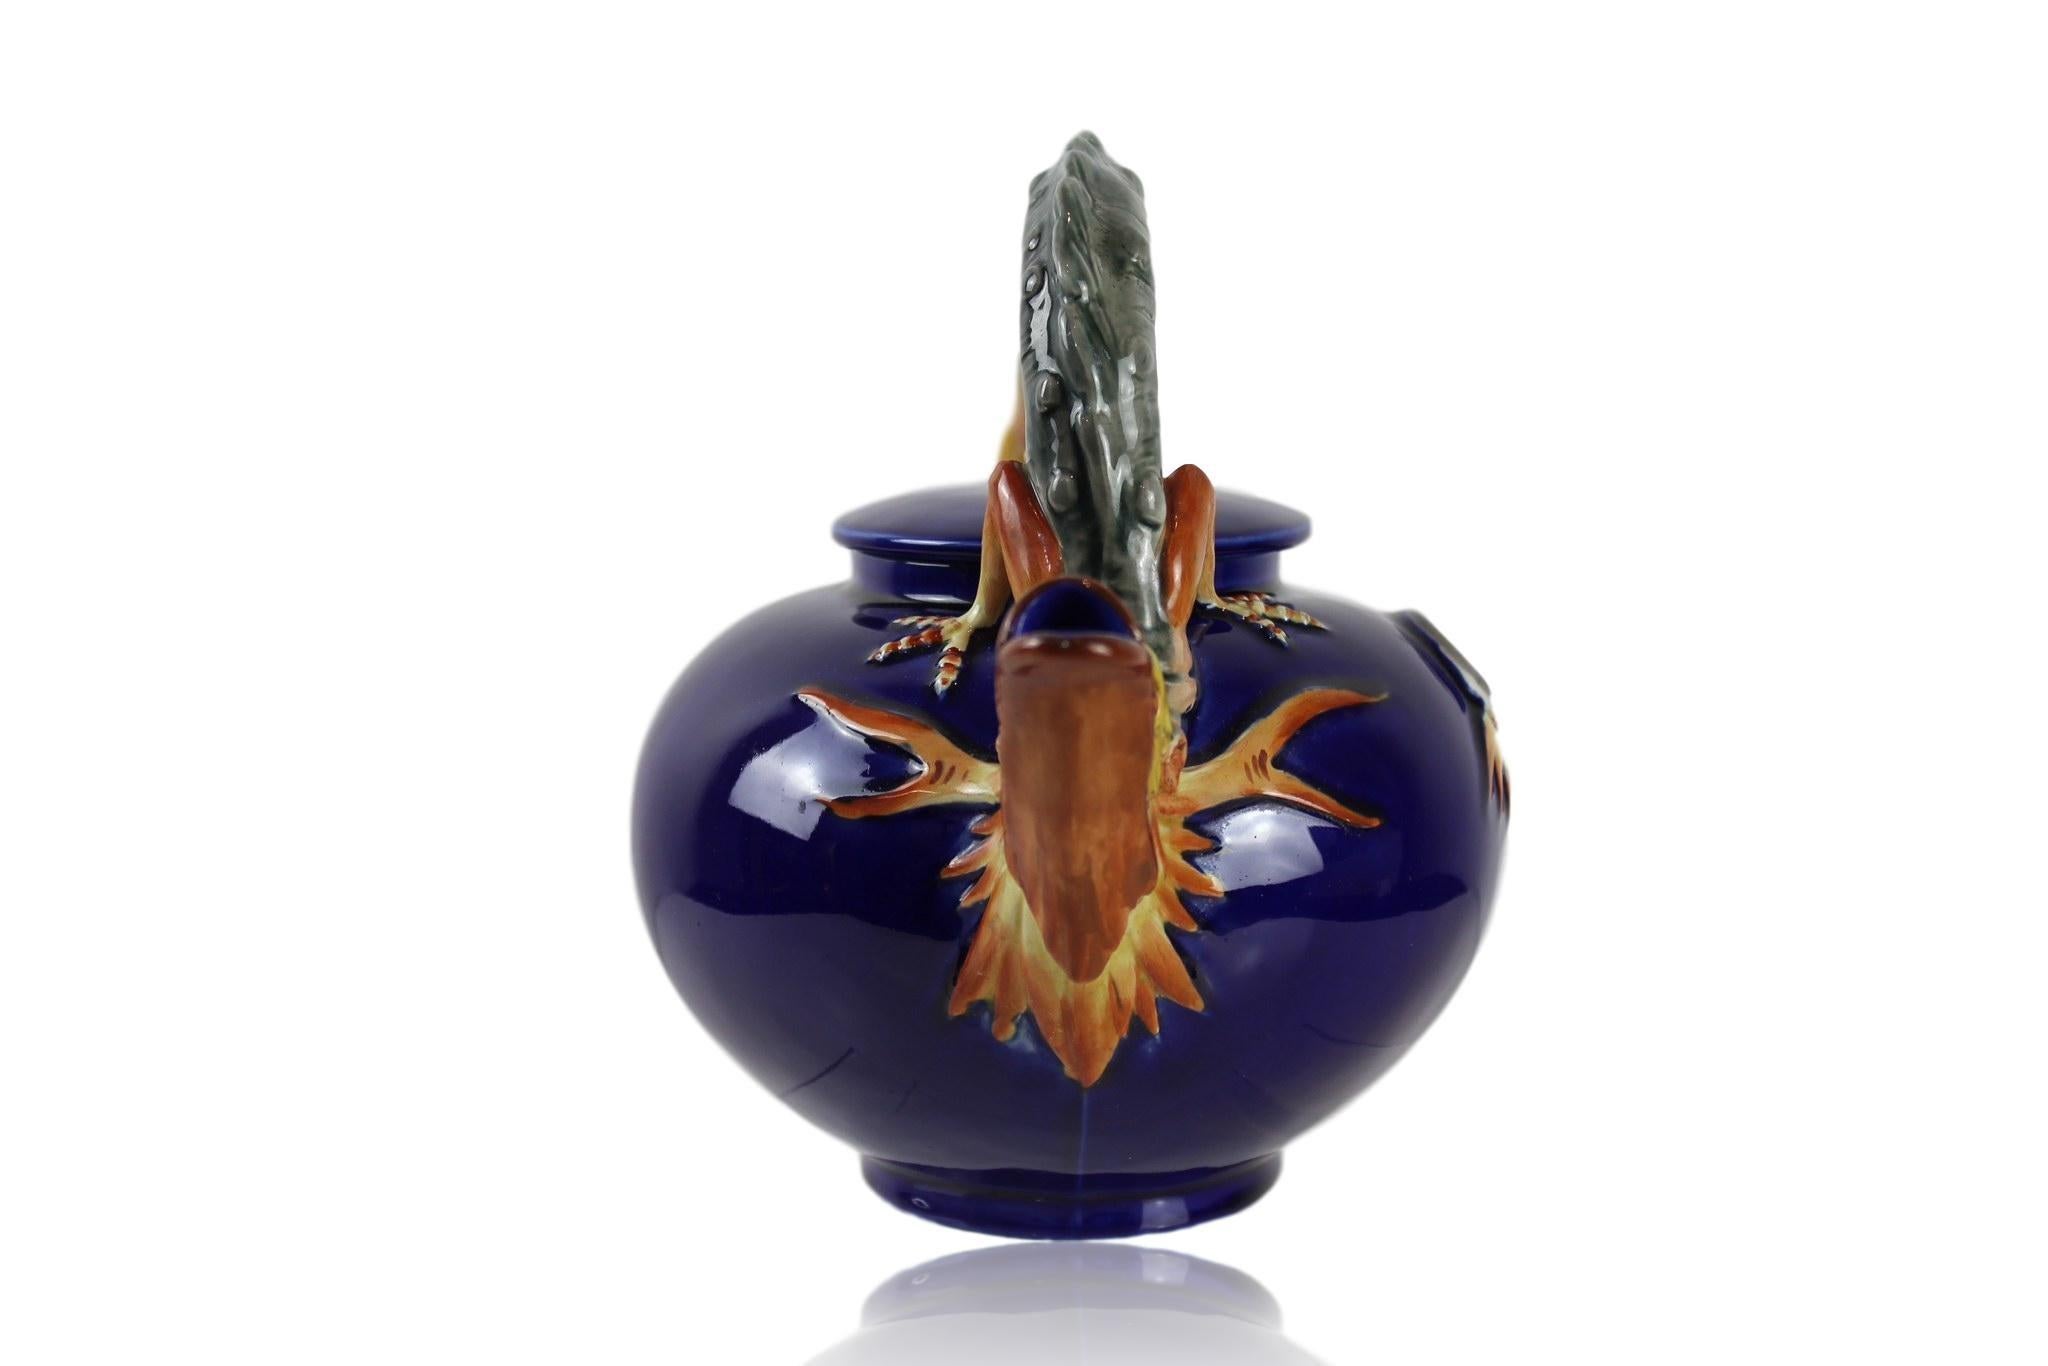 Victorian Wedgwood Majolica Dragon Teapot in Cobalt Blue by Hugues Protât, Dated 1871